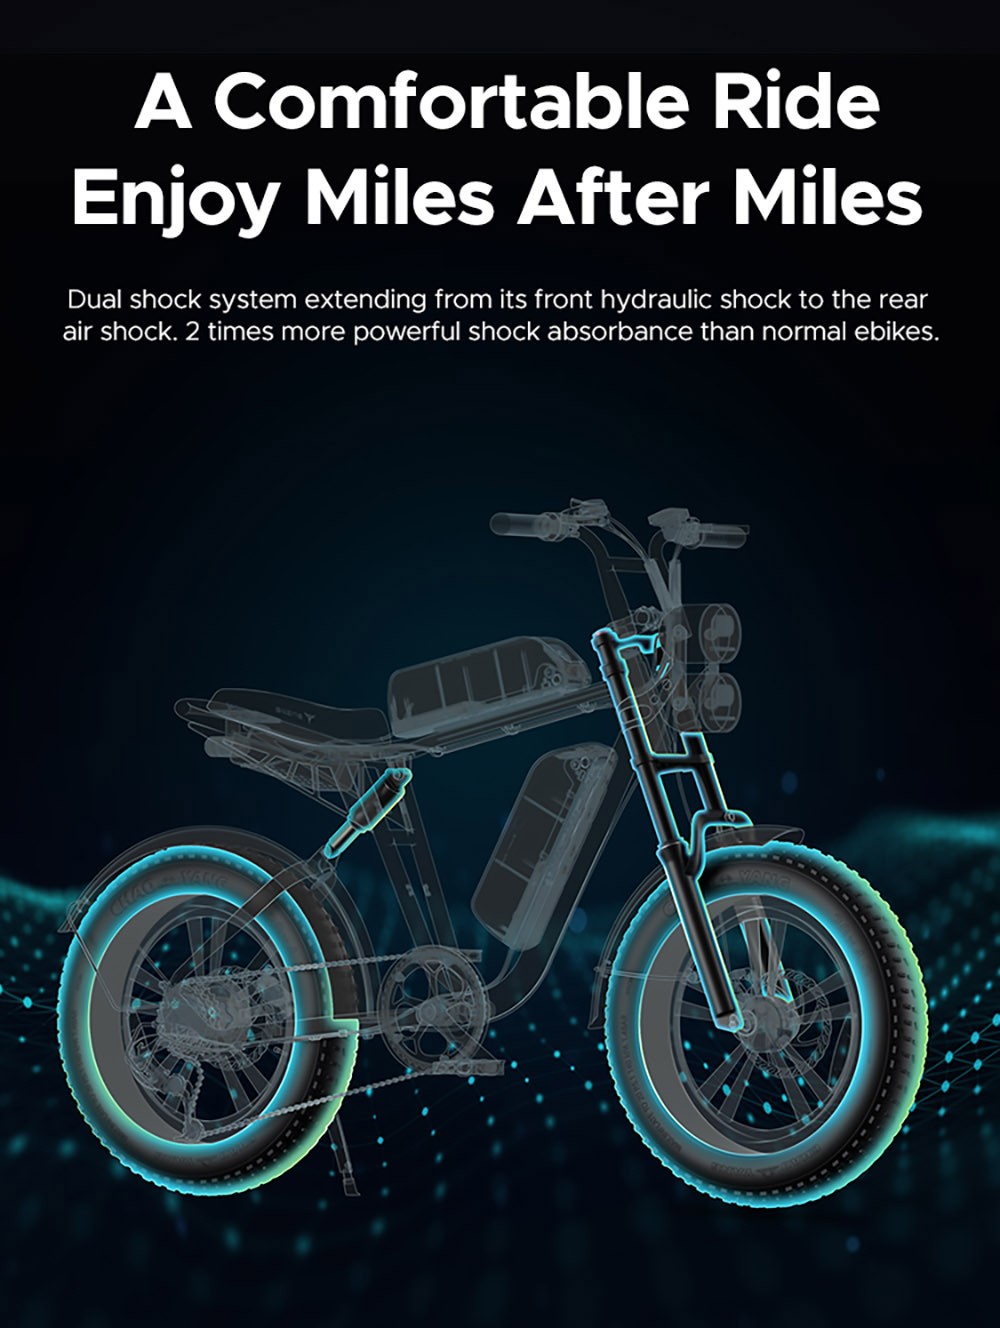 ENGWE M20 Dual 13Ah Battery Electric Bike, 20*4.0 inch fat Tires, 750W Brushless Motor